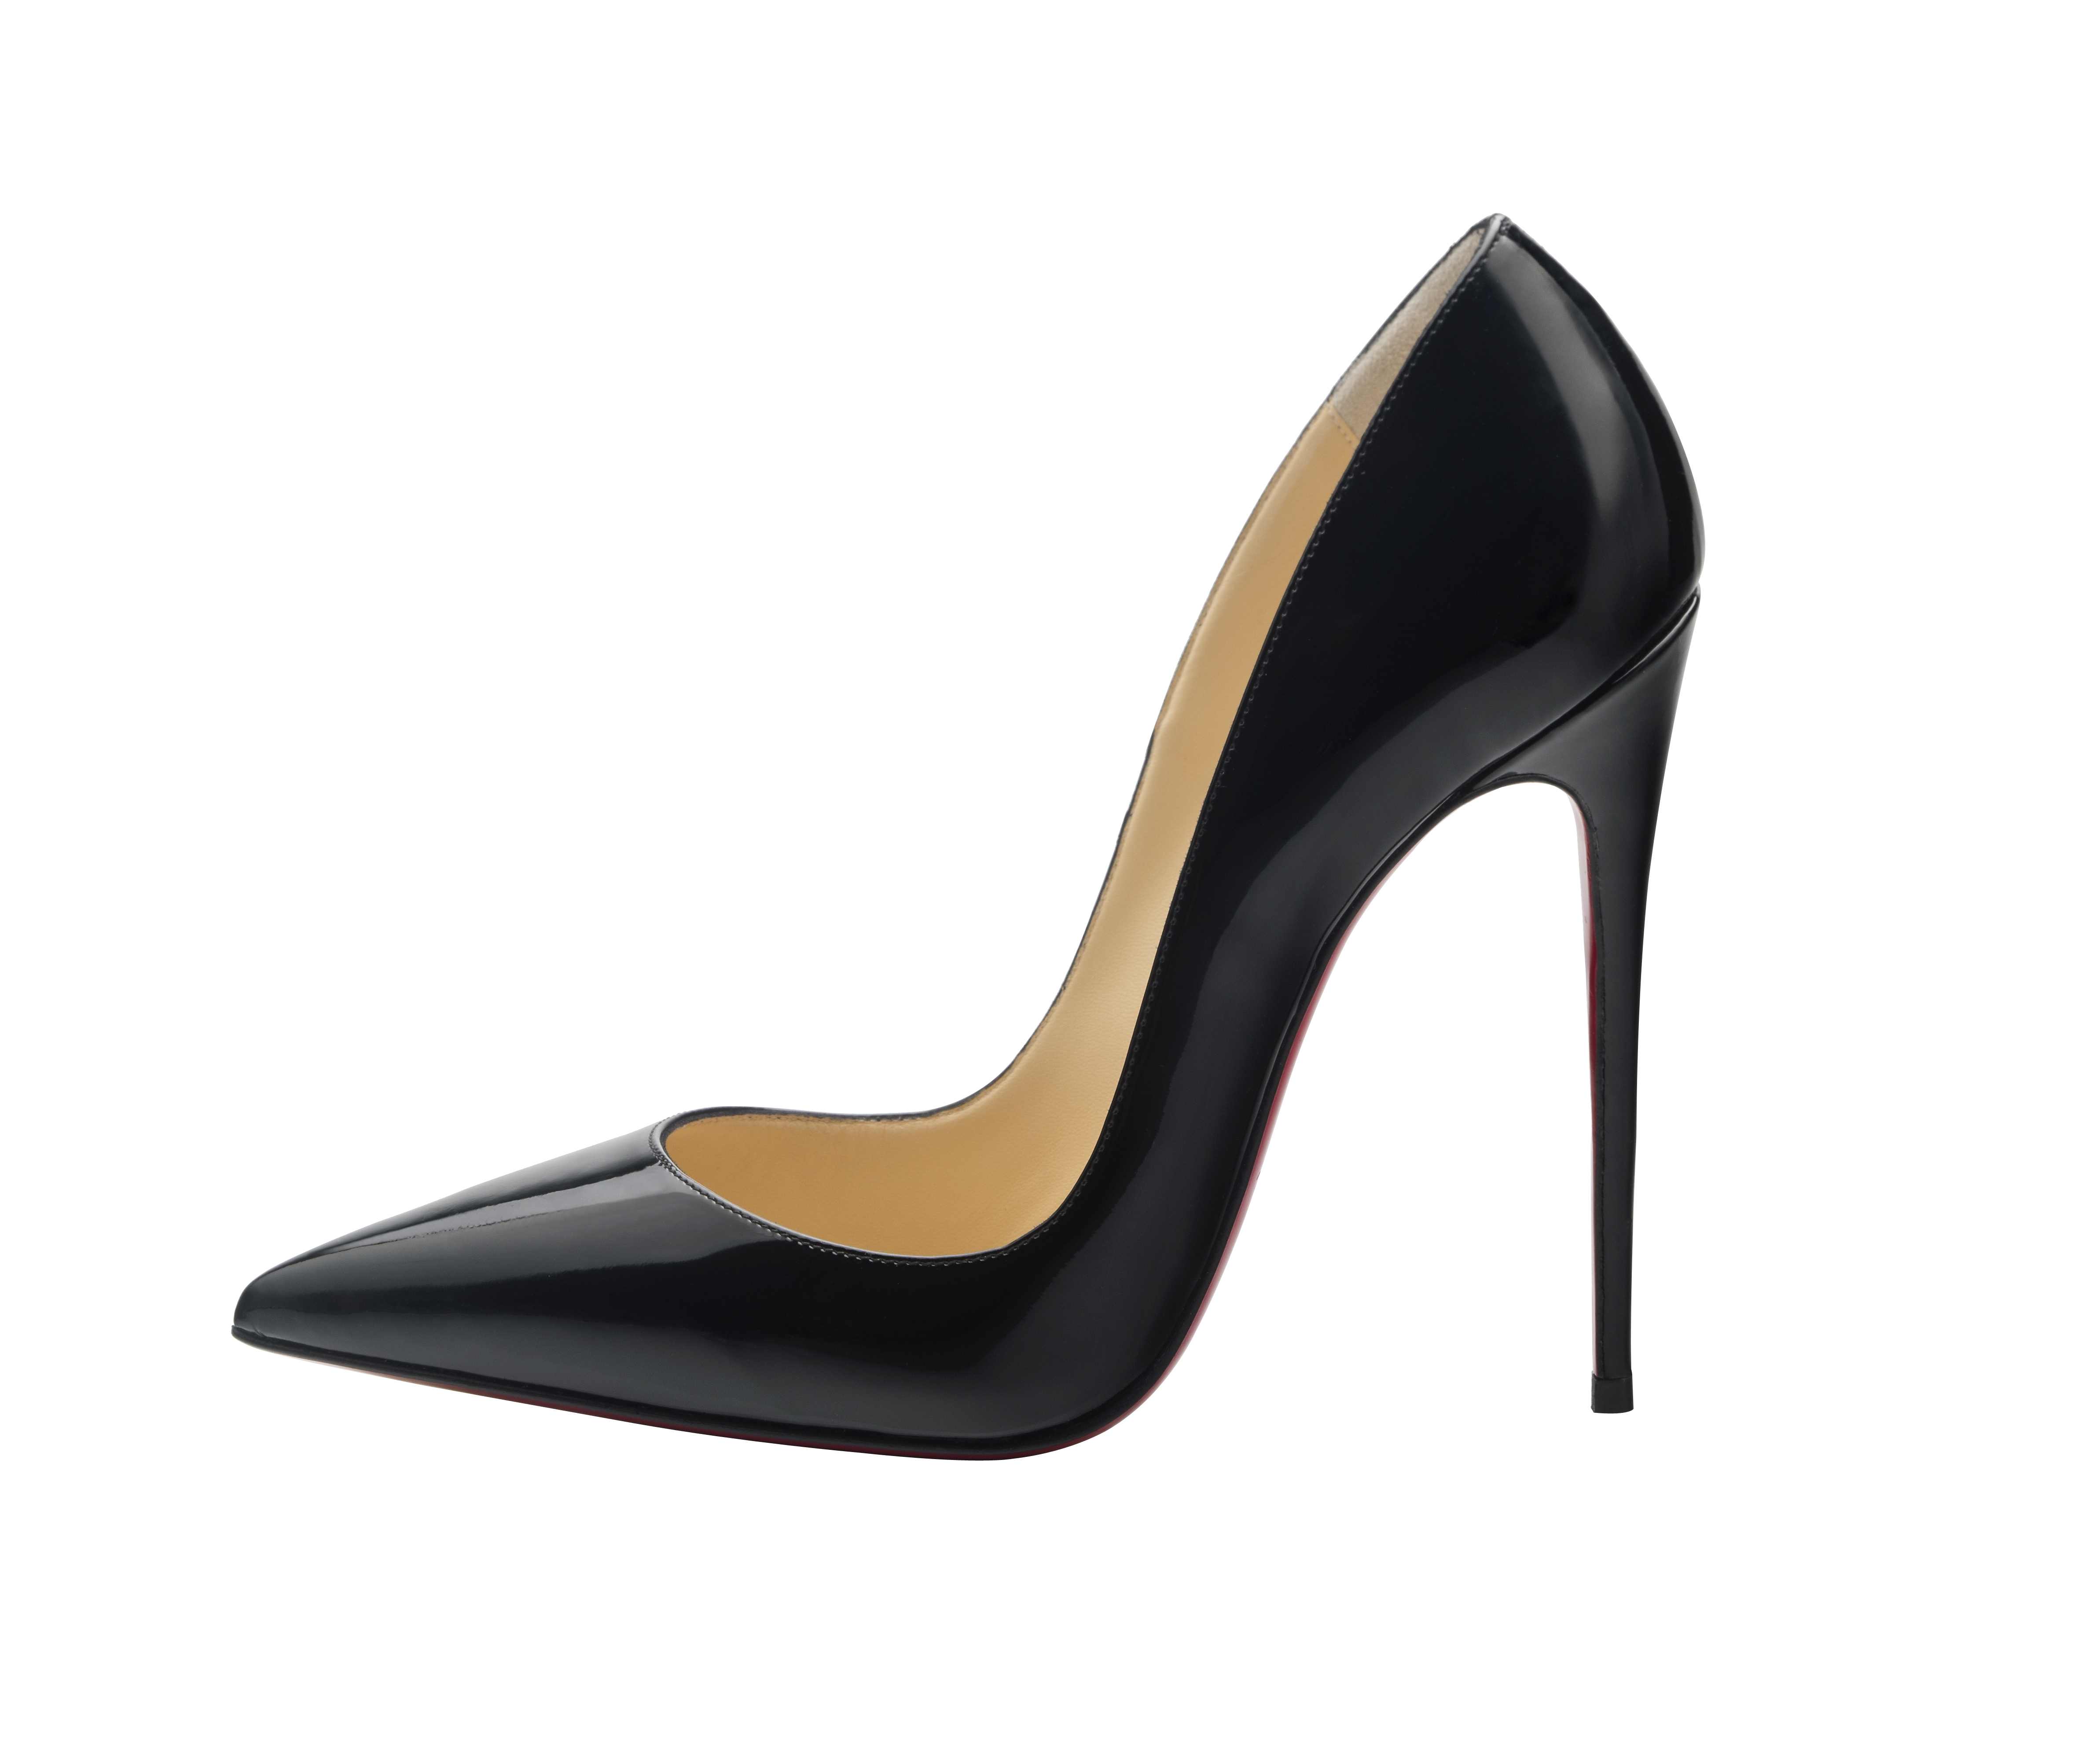 Christian Louboutin will open their first store in Houston at The ...